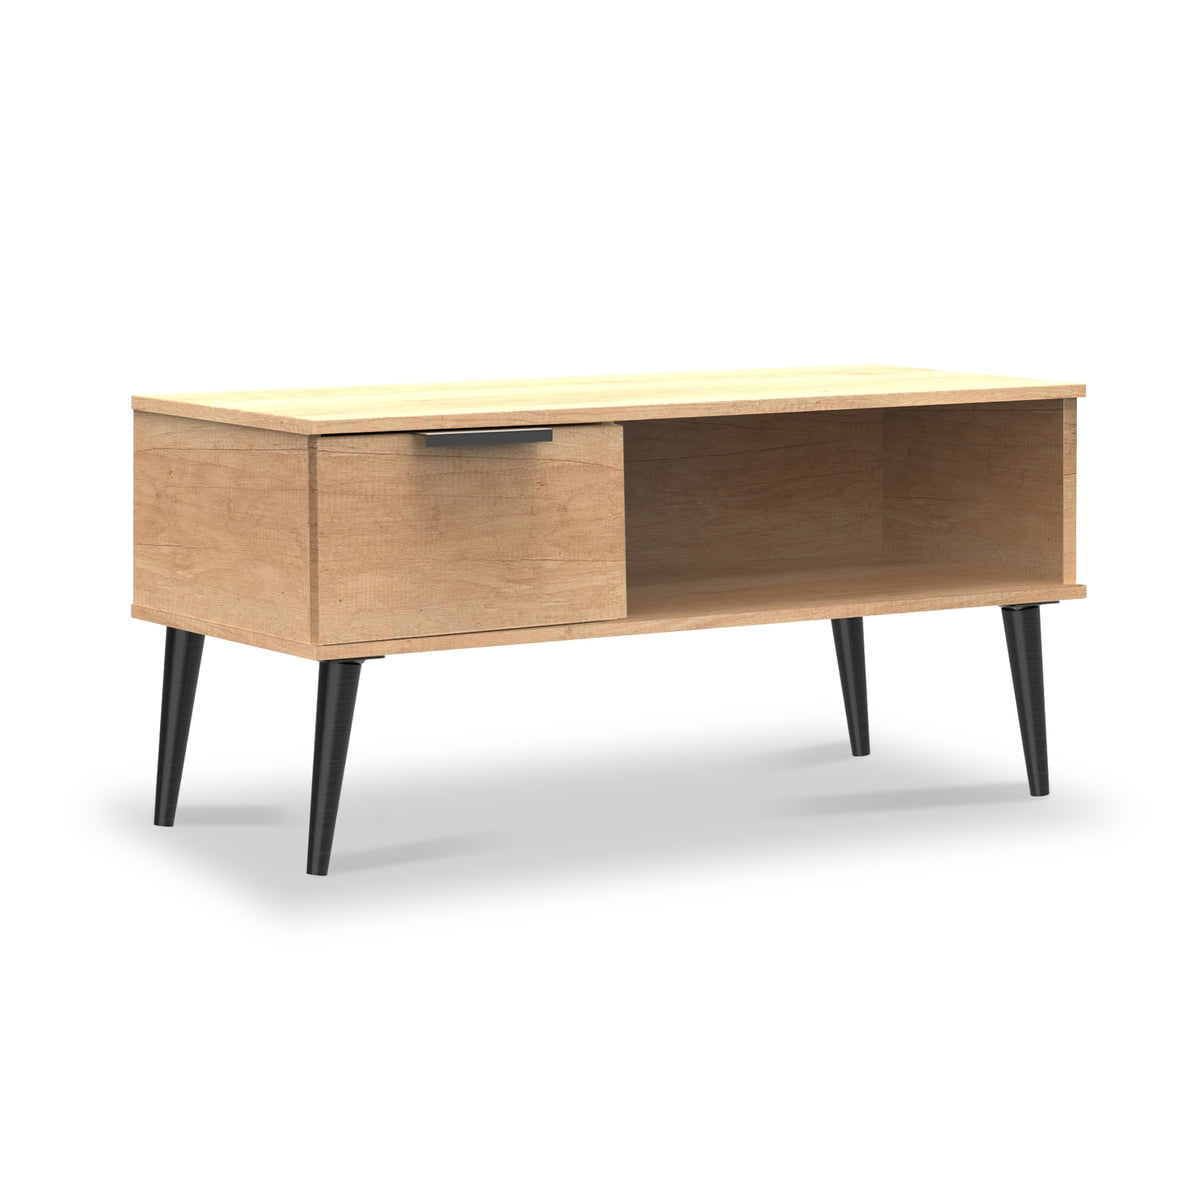 Asher Light Oak 1 Drawer Coffee Table from Roseland Furniture